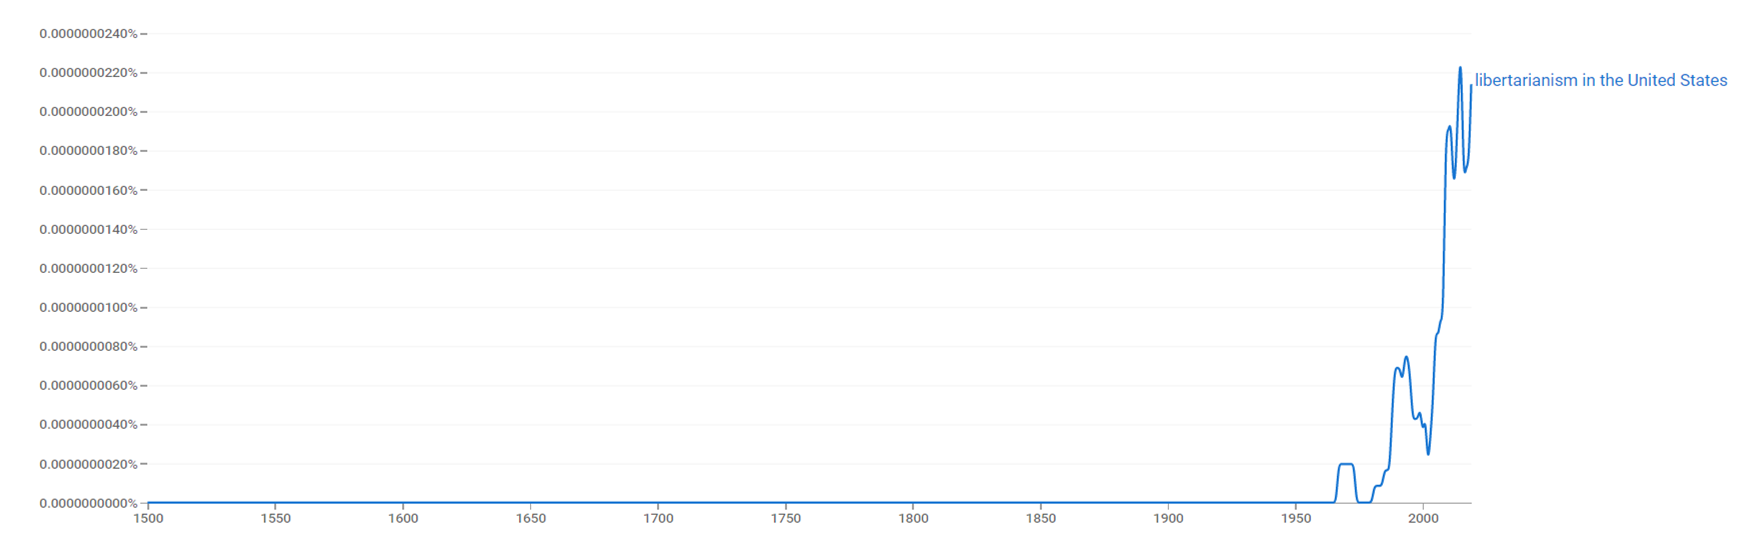 Libertarianism in the United States ngram.png